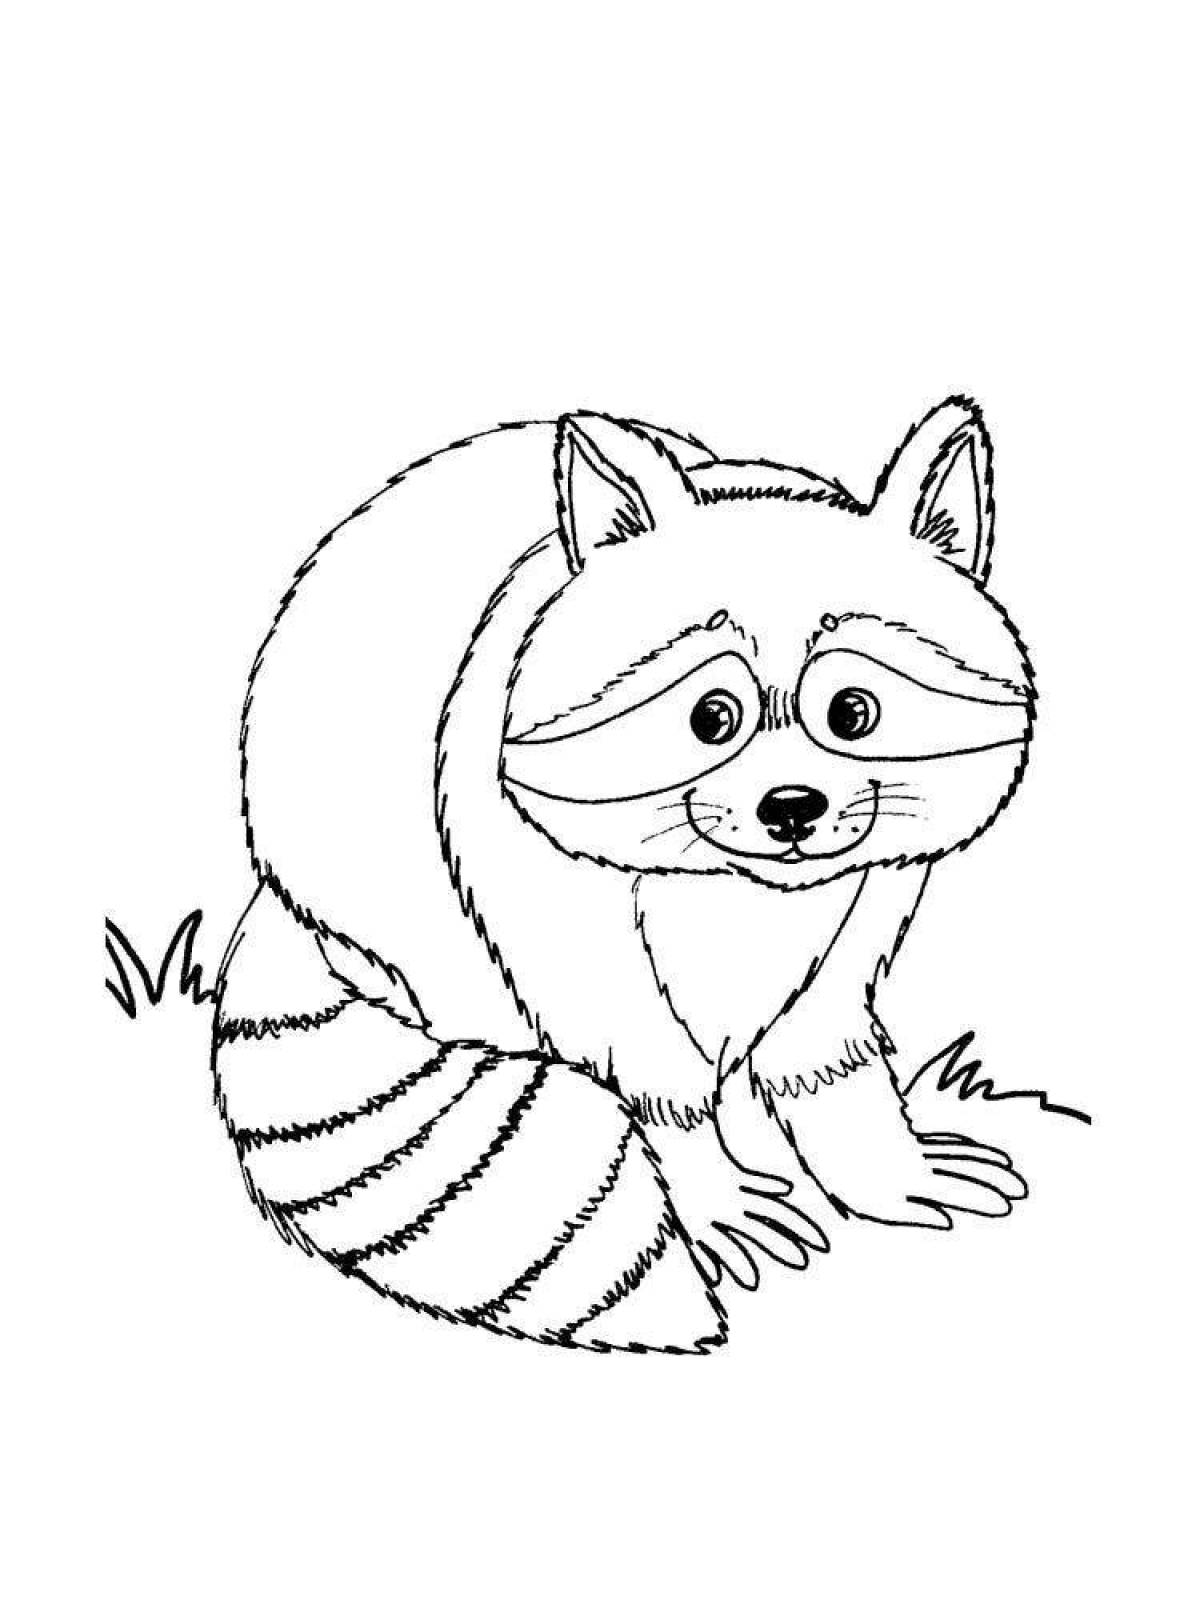 Coloring page happy raccoon for kids